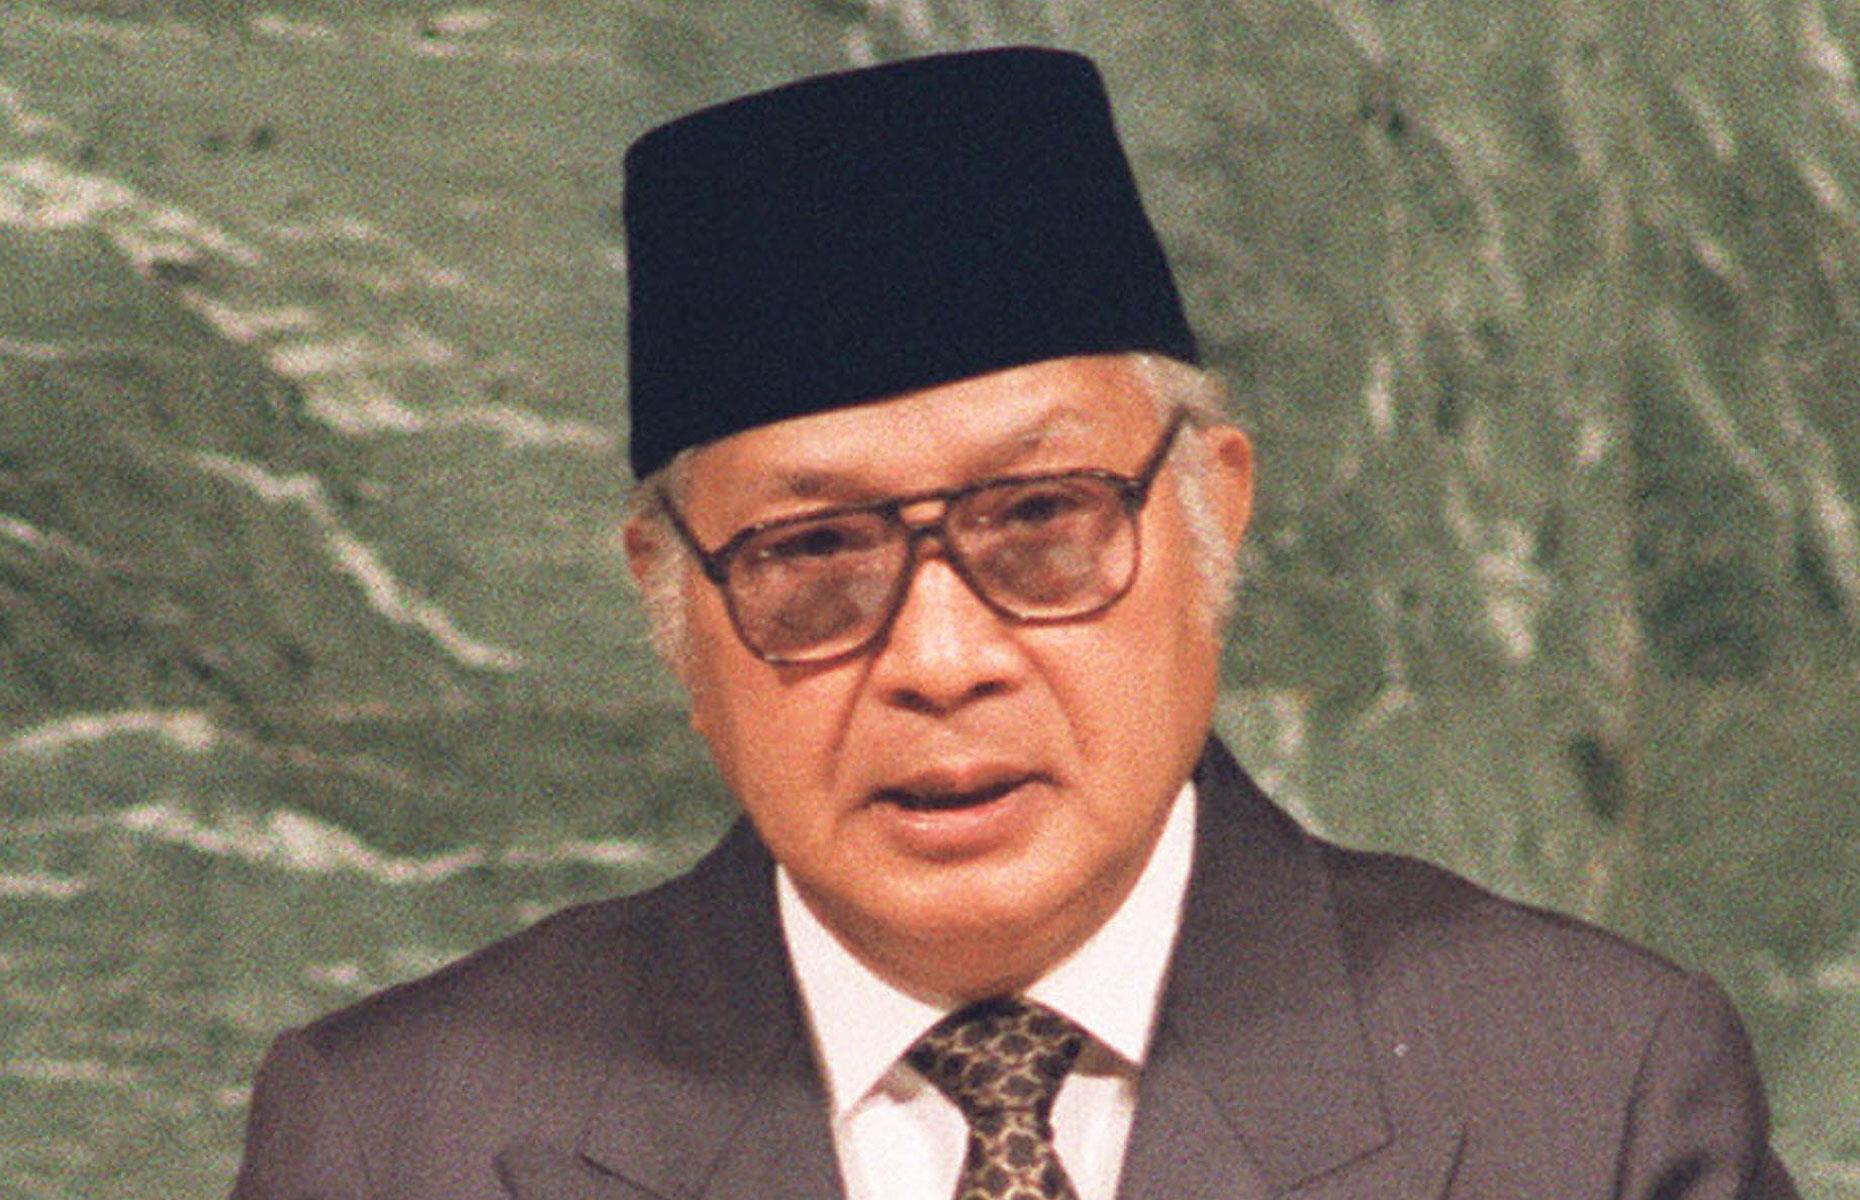 <p>Suharto was president of Indonesia for 31 years until his resignation in 1998. The military despot, who in 2004 was named the most corrupt world leader of the previous 20 years by Transparency International, plundered up to $35 billion – that's the equivalent of $55 billion today – during his grip on power through a system his opponents dubbed "corruption, collusion, nepotism".</p>